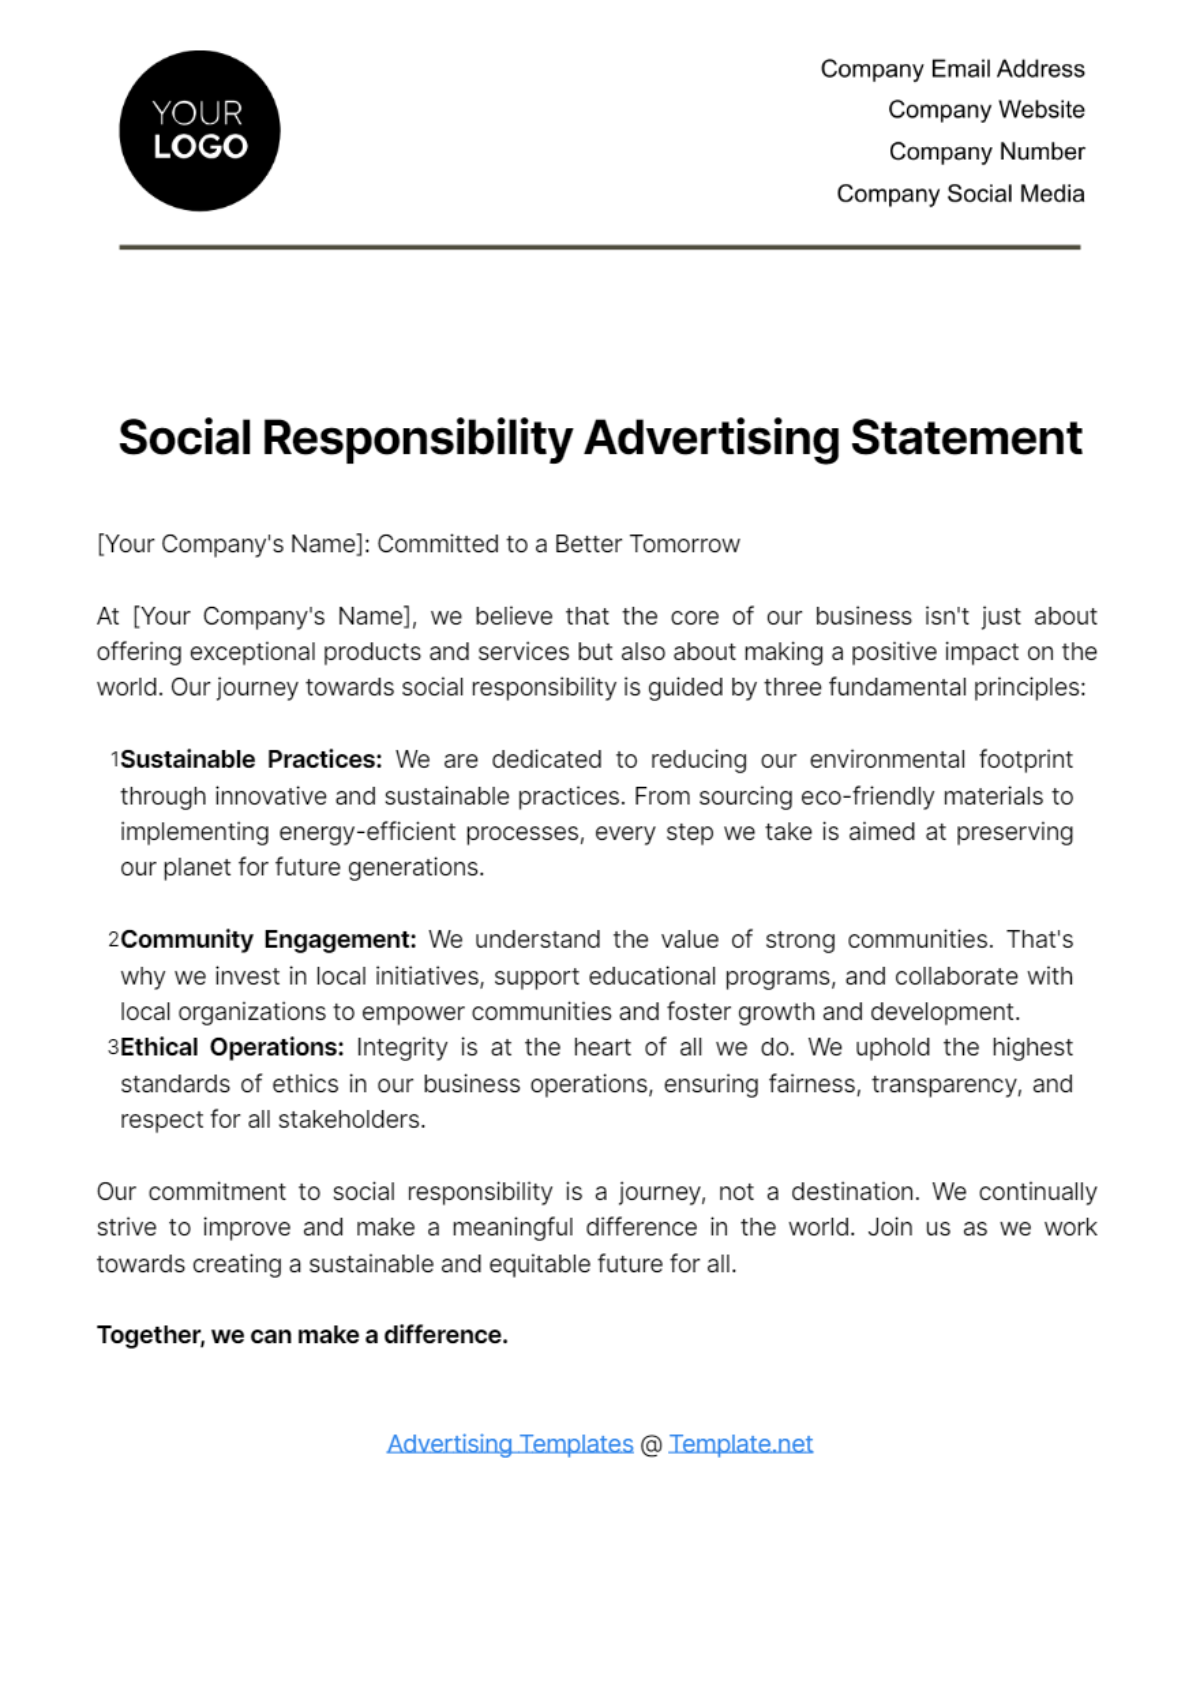 Social Responsibility Advertising Statement Template